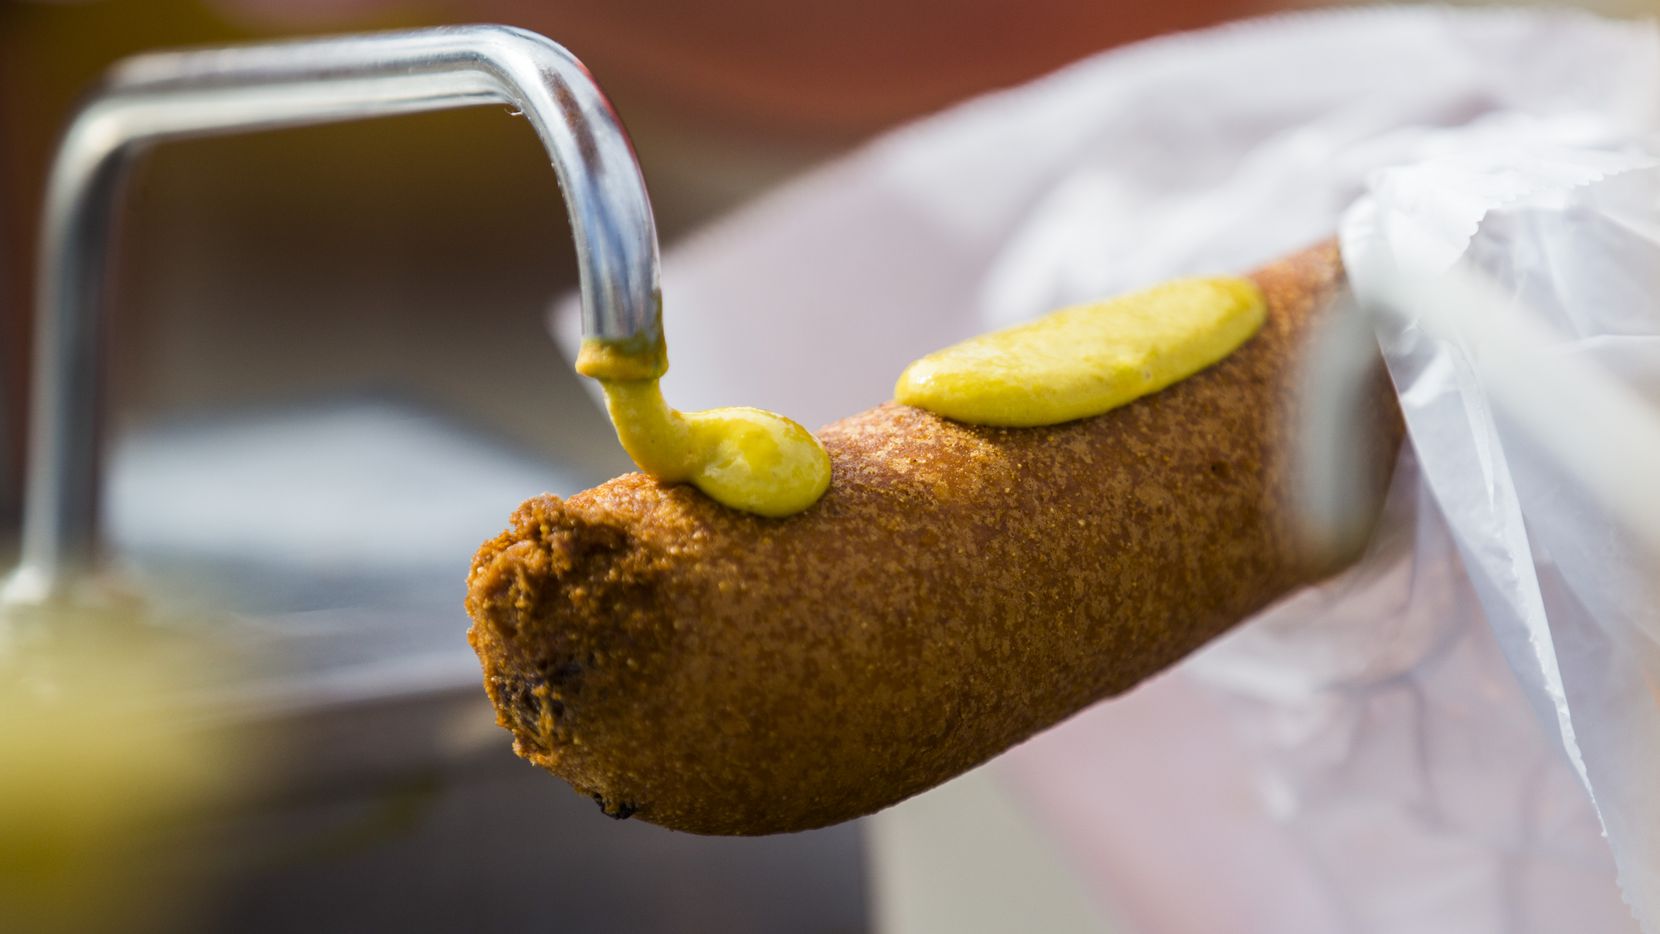 The "right" way to eat a Fletcher's corny dog at the State Fair of Texas is with mustard,...